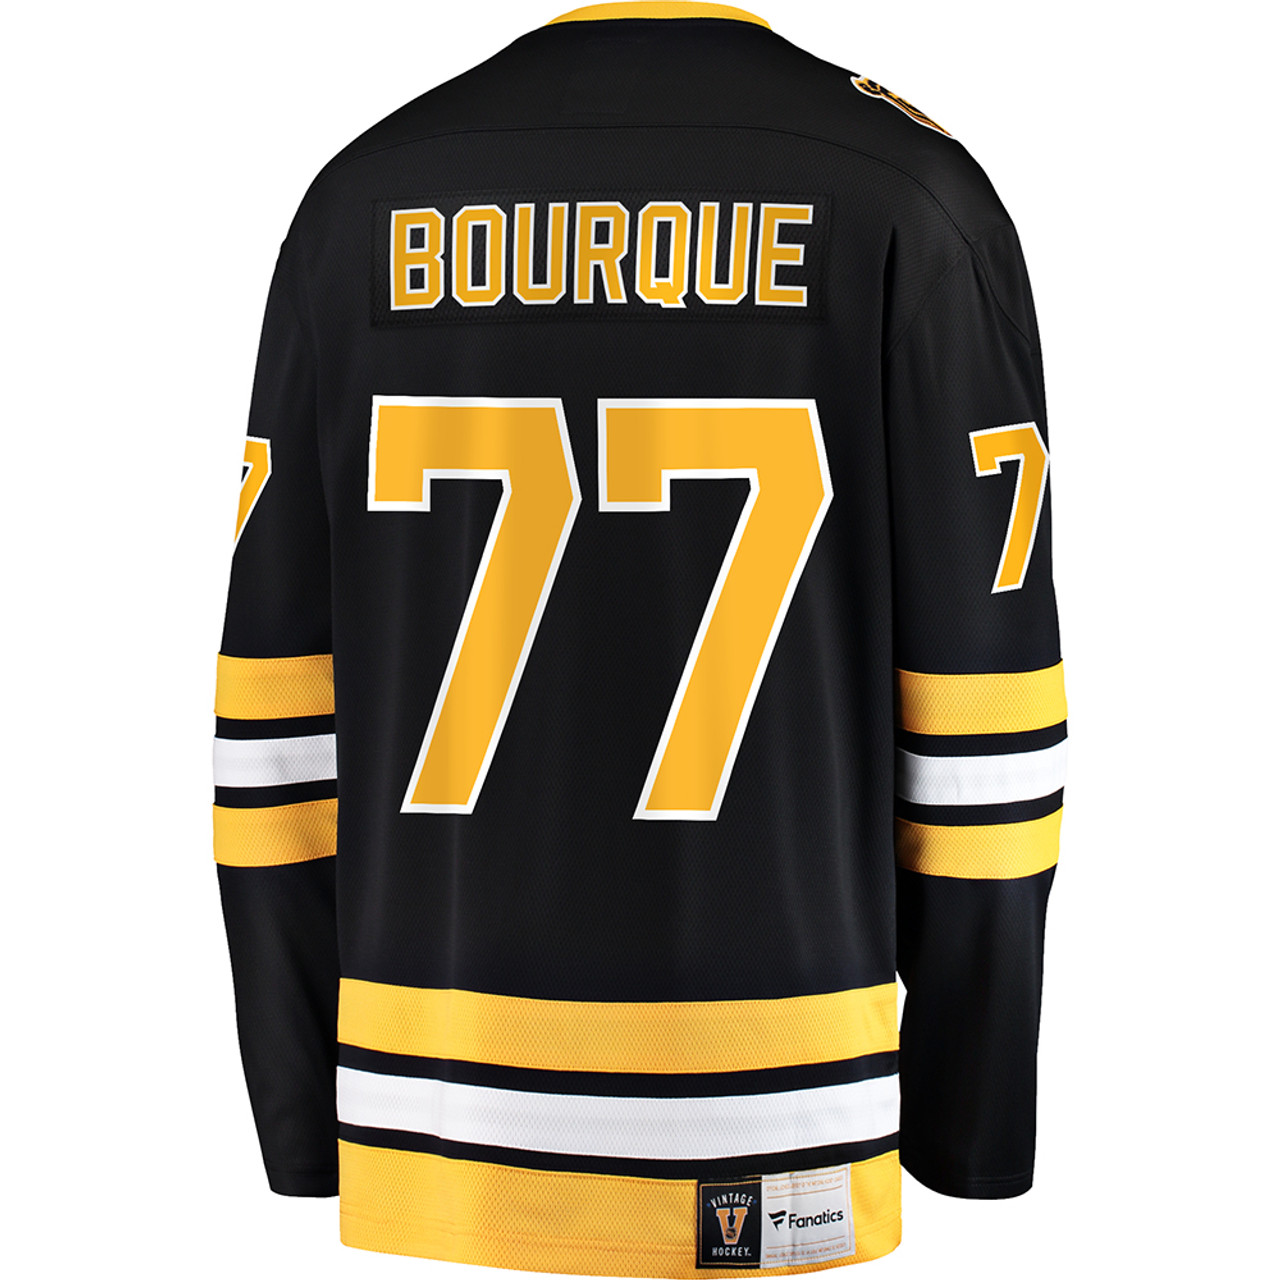 Ray Bourque Premier Jersey - Yellow 77 Winter Classic Boston Bruins Jersey